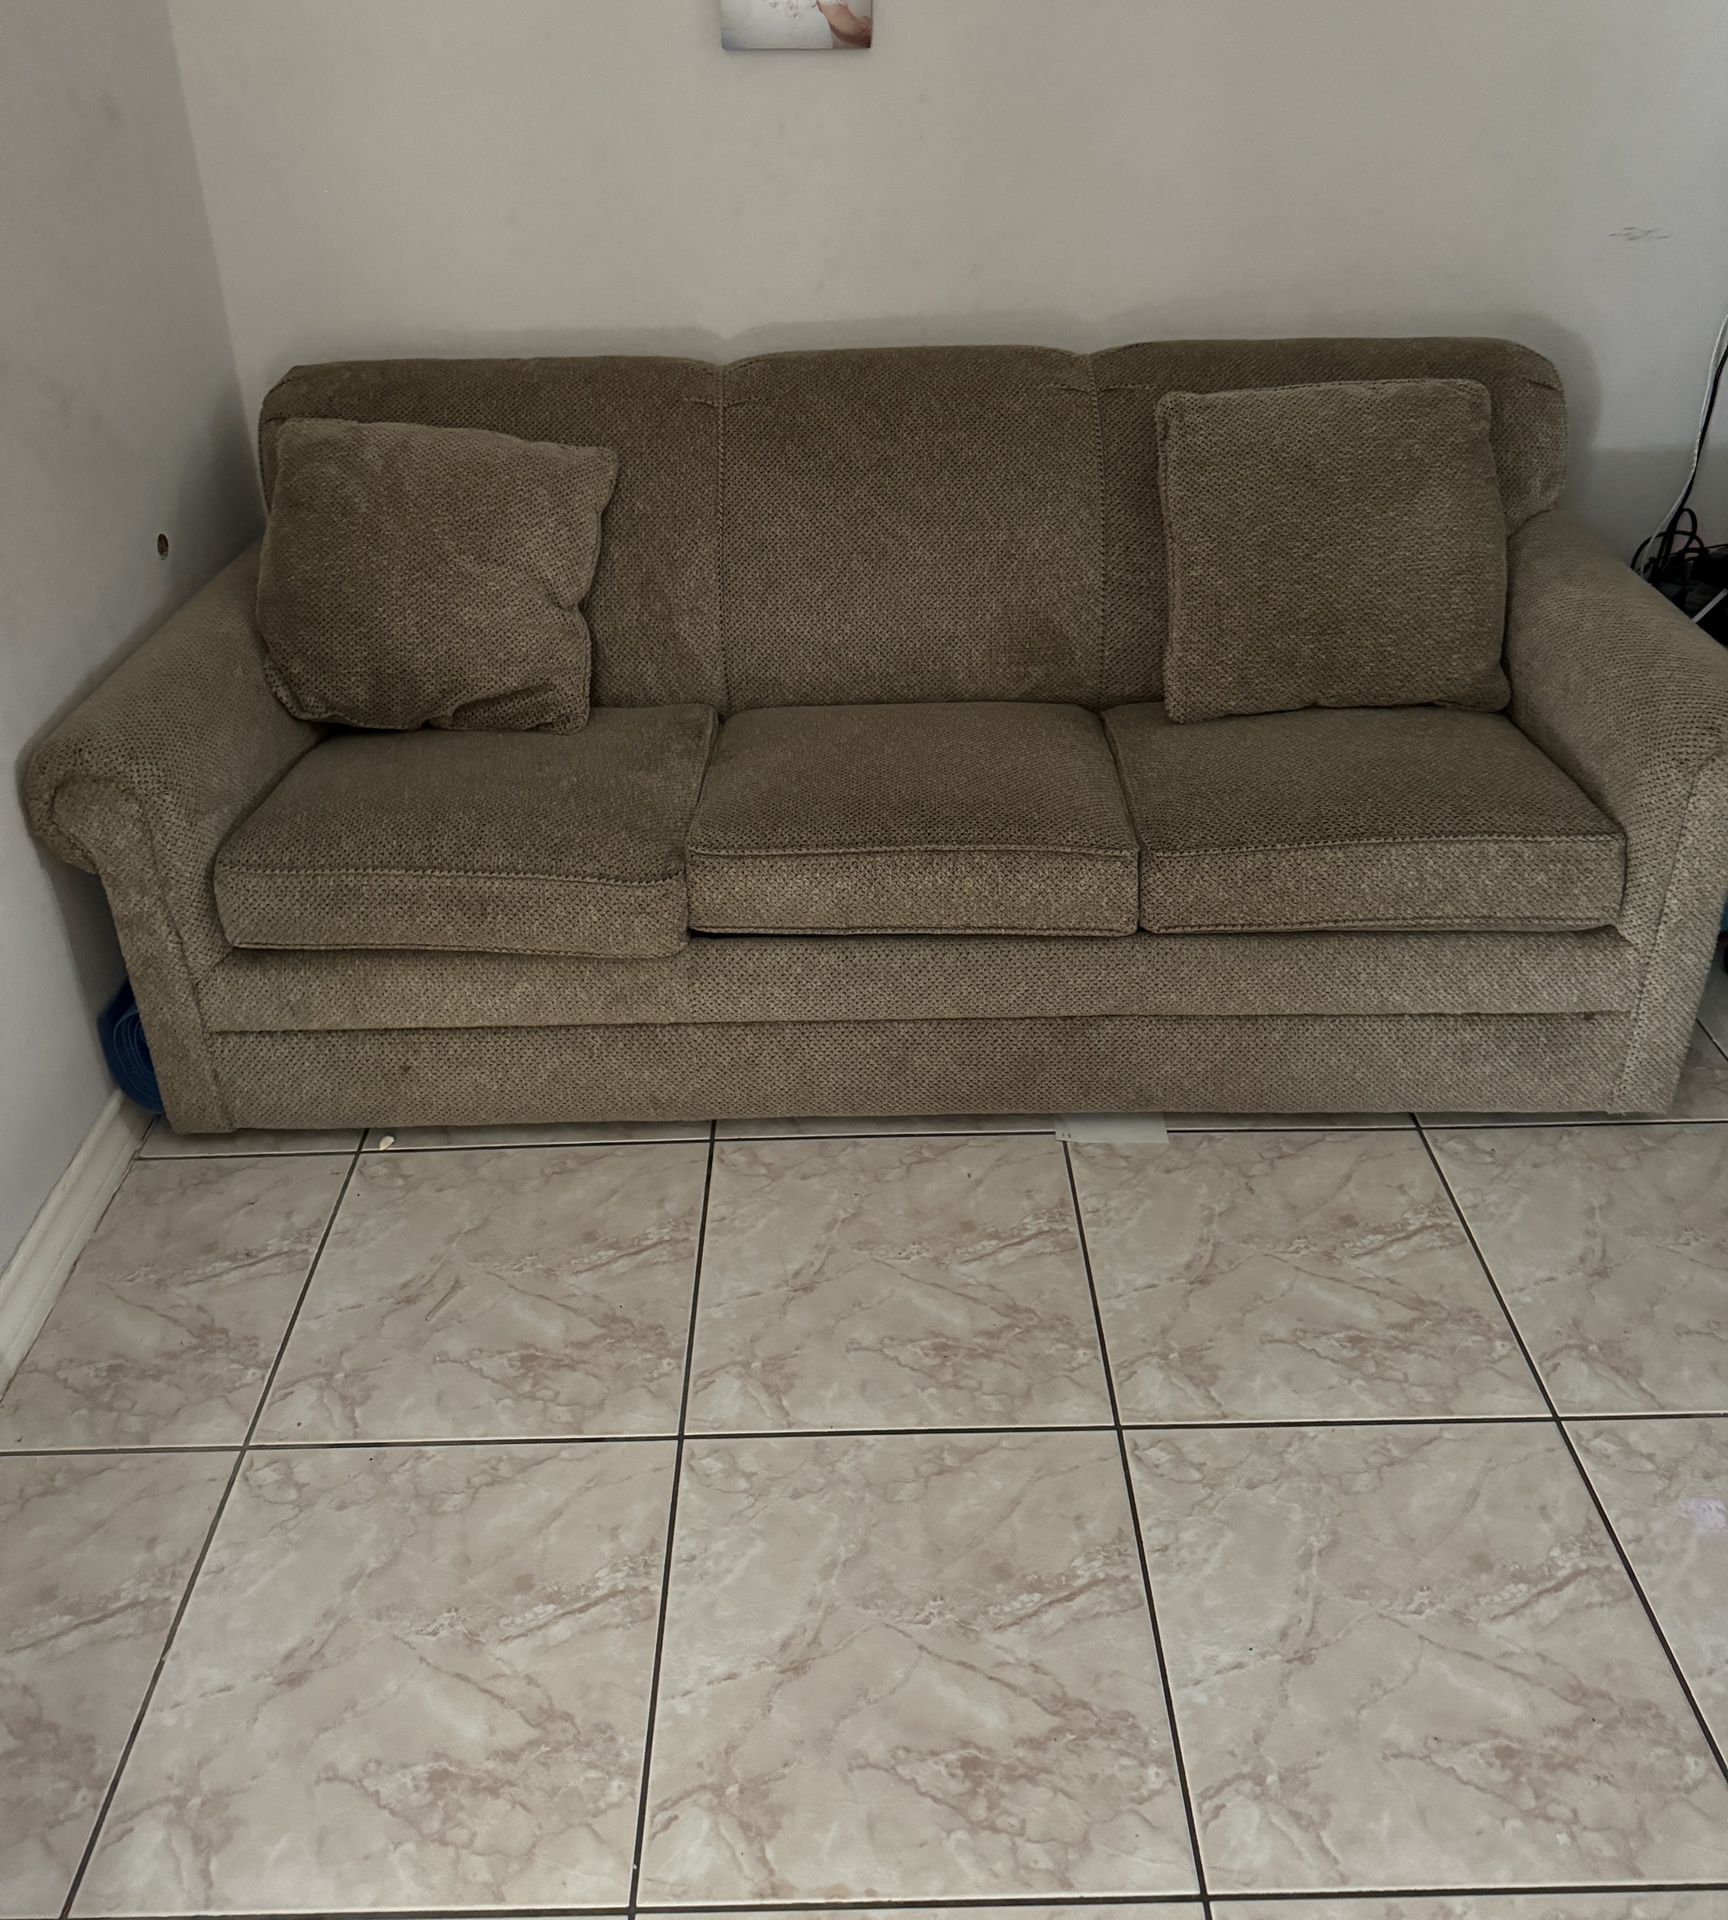 Lacks Furniture Couch Bed